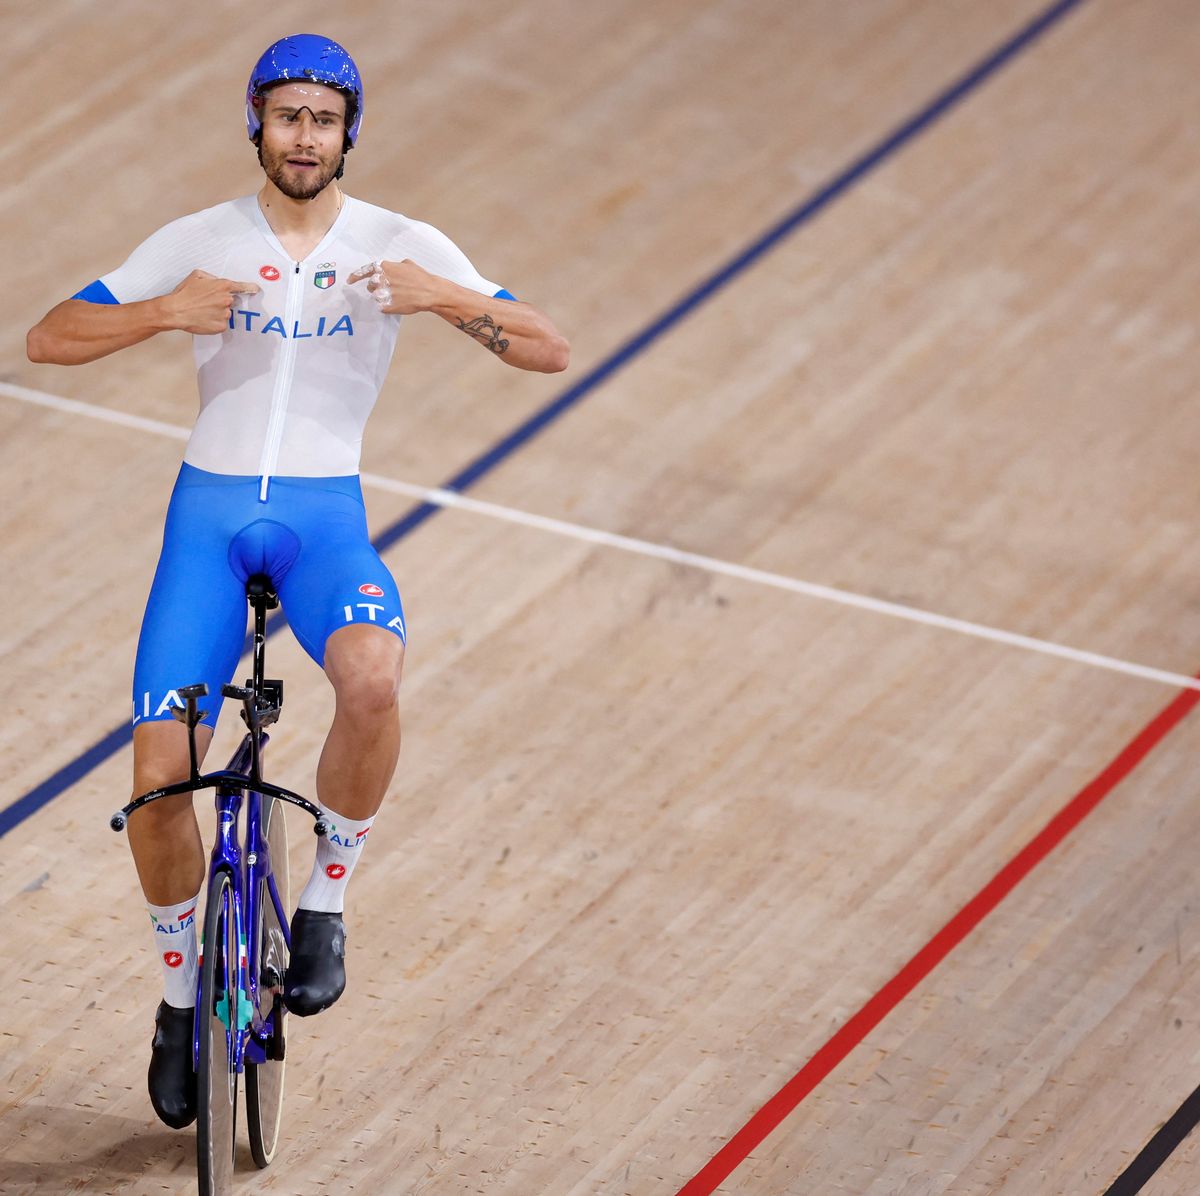 Ganna considering an Hour Record attempt in 2022